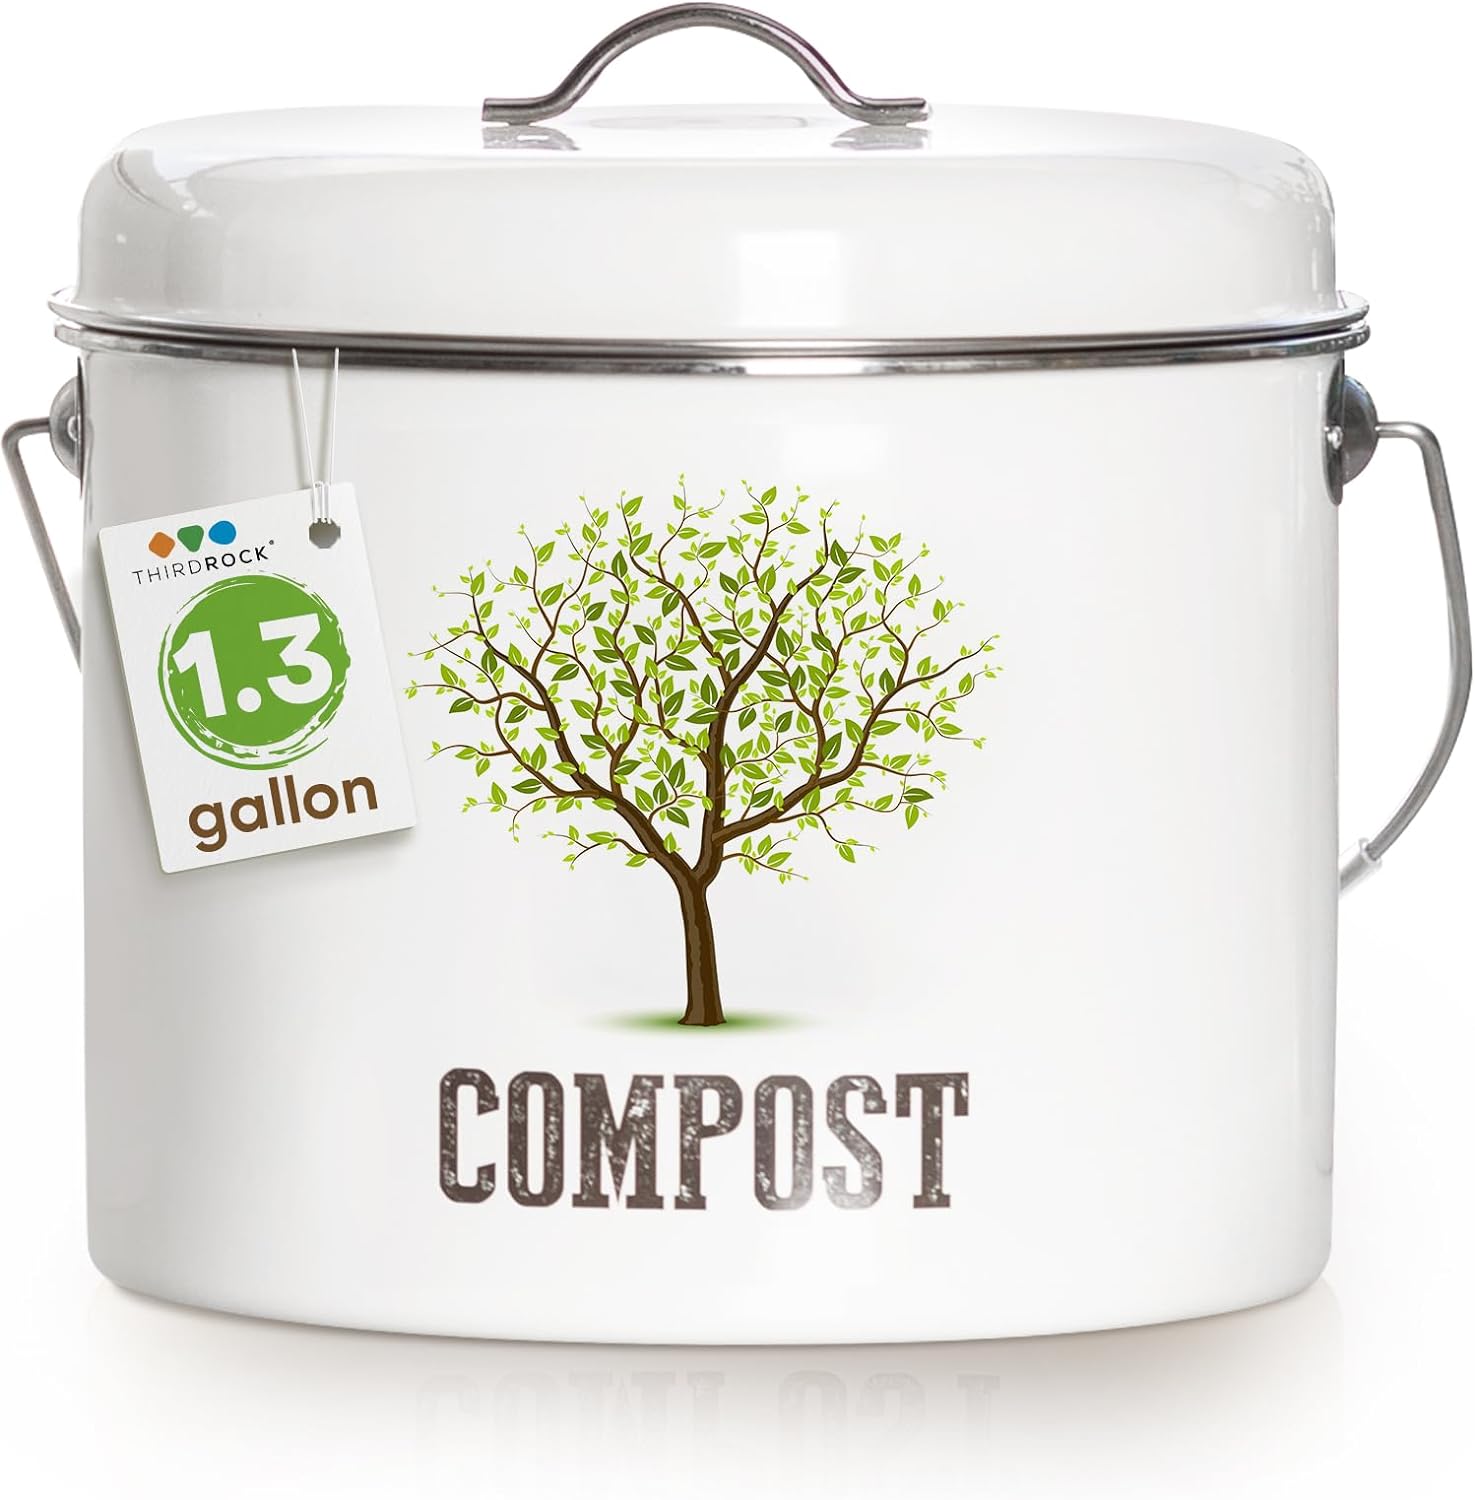 Third Rock Kitchen Compost Bin Review:  10 Compelling Differences